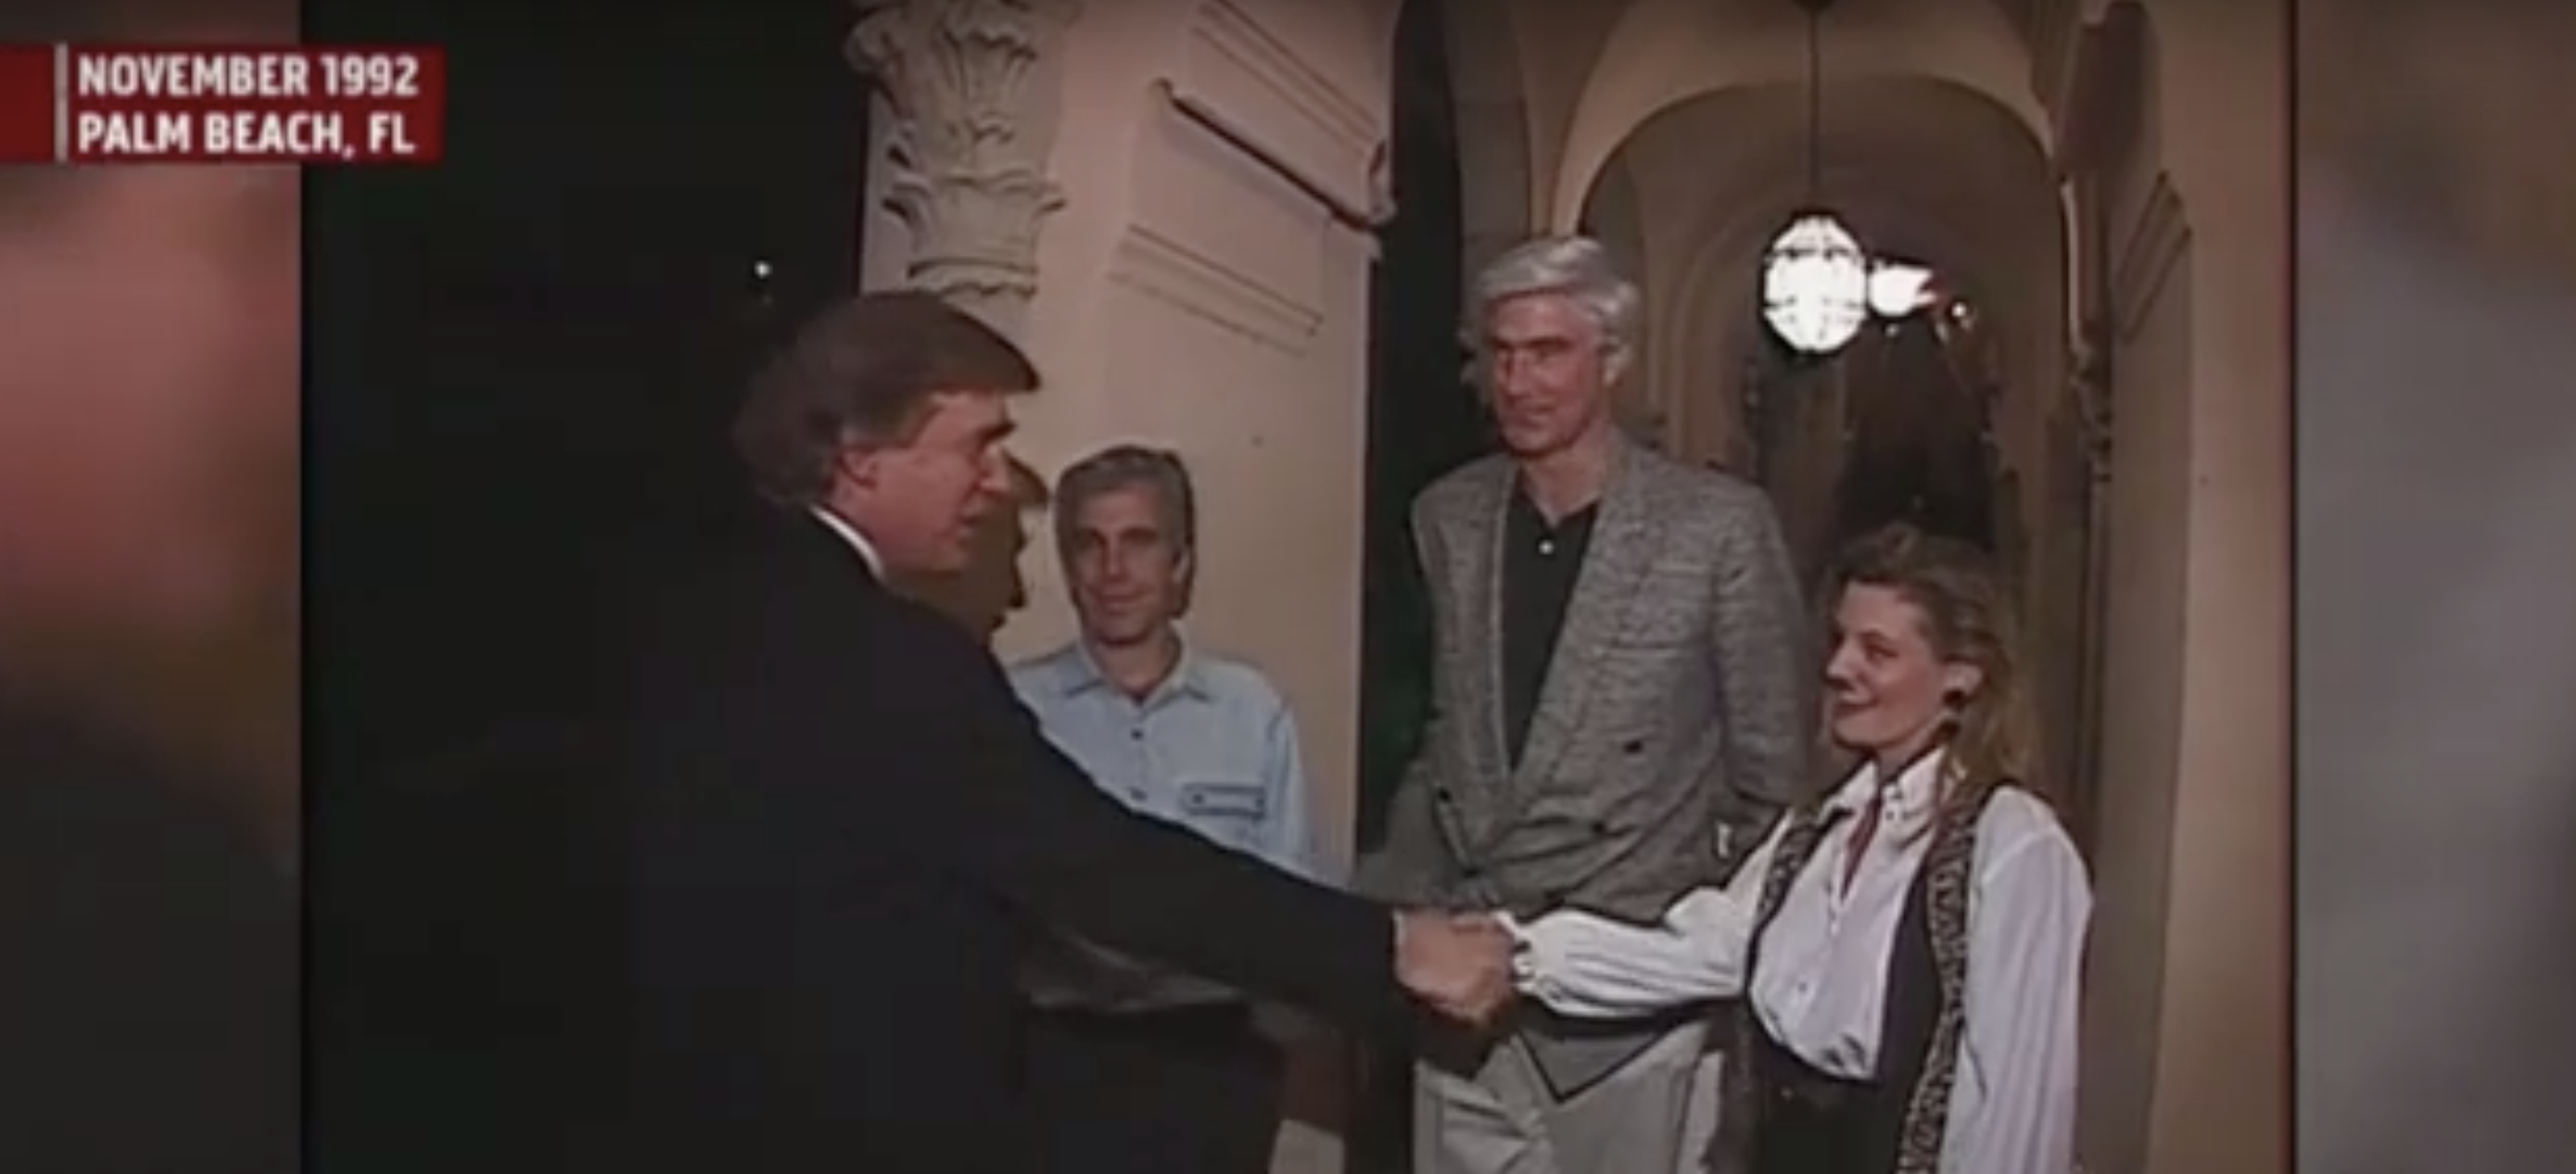 Democrat Tom McMillen is seen arriving with Jeffrey Epstein and a woman to Trump's Mar-a-Lago in 1992. (Screenshot Youtube/MSNBC)